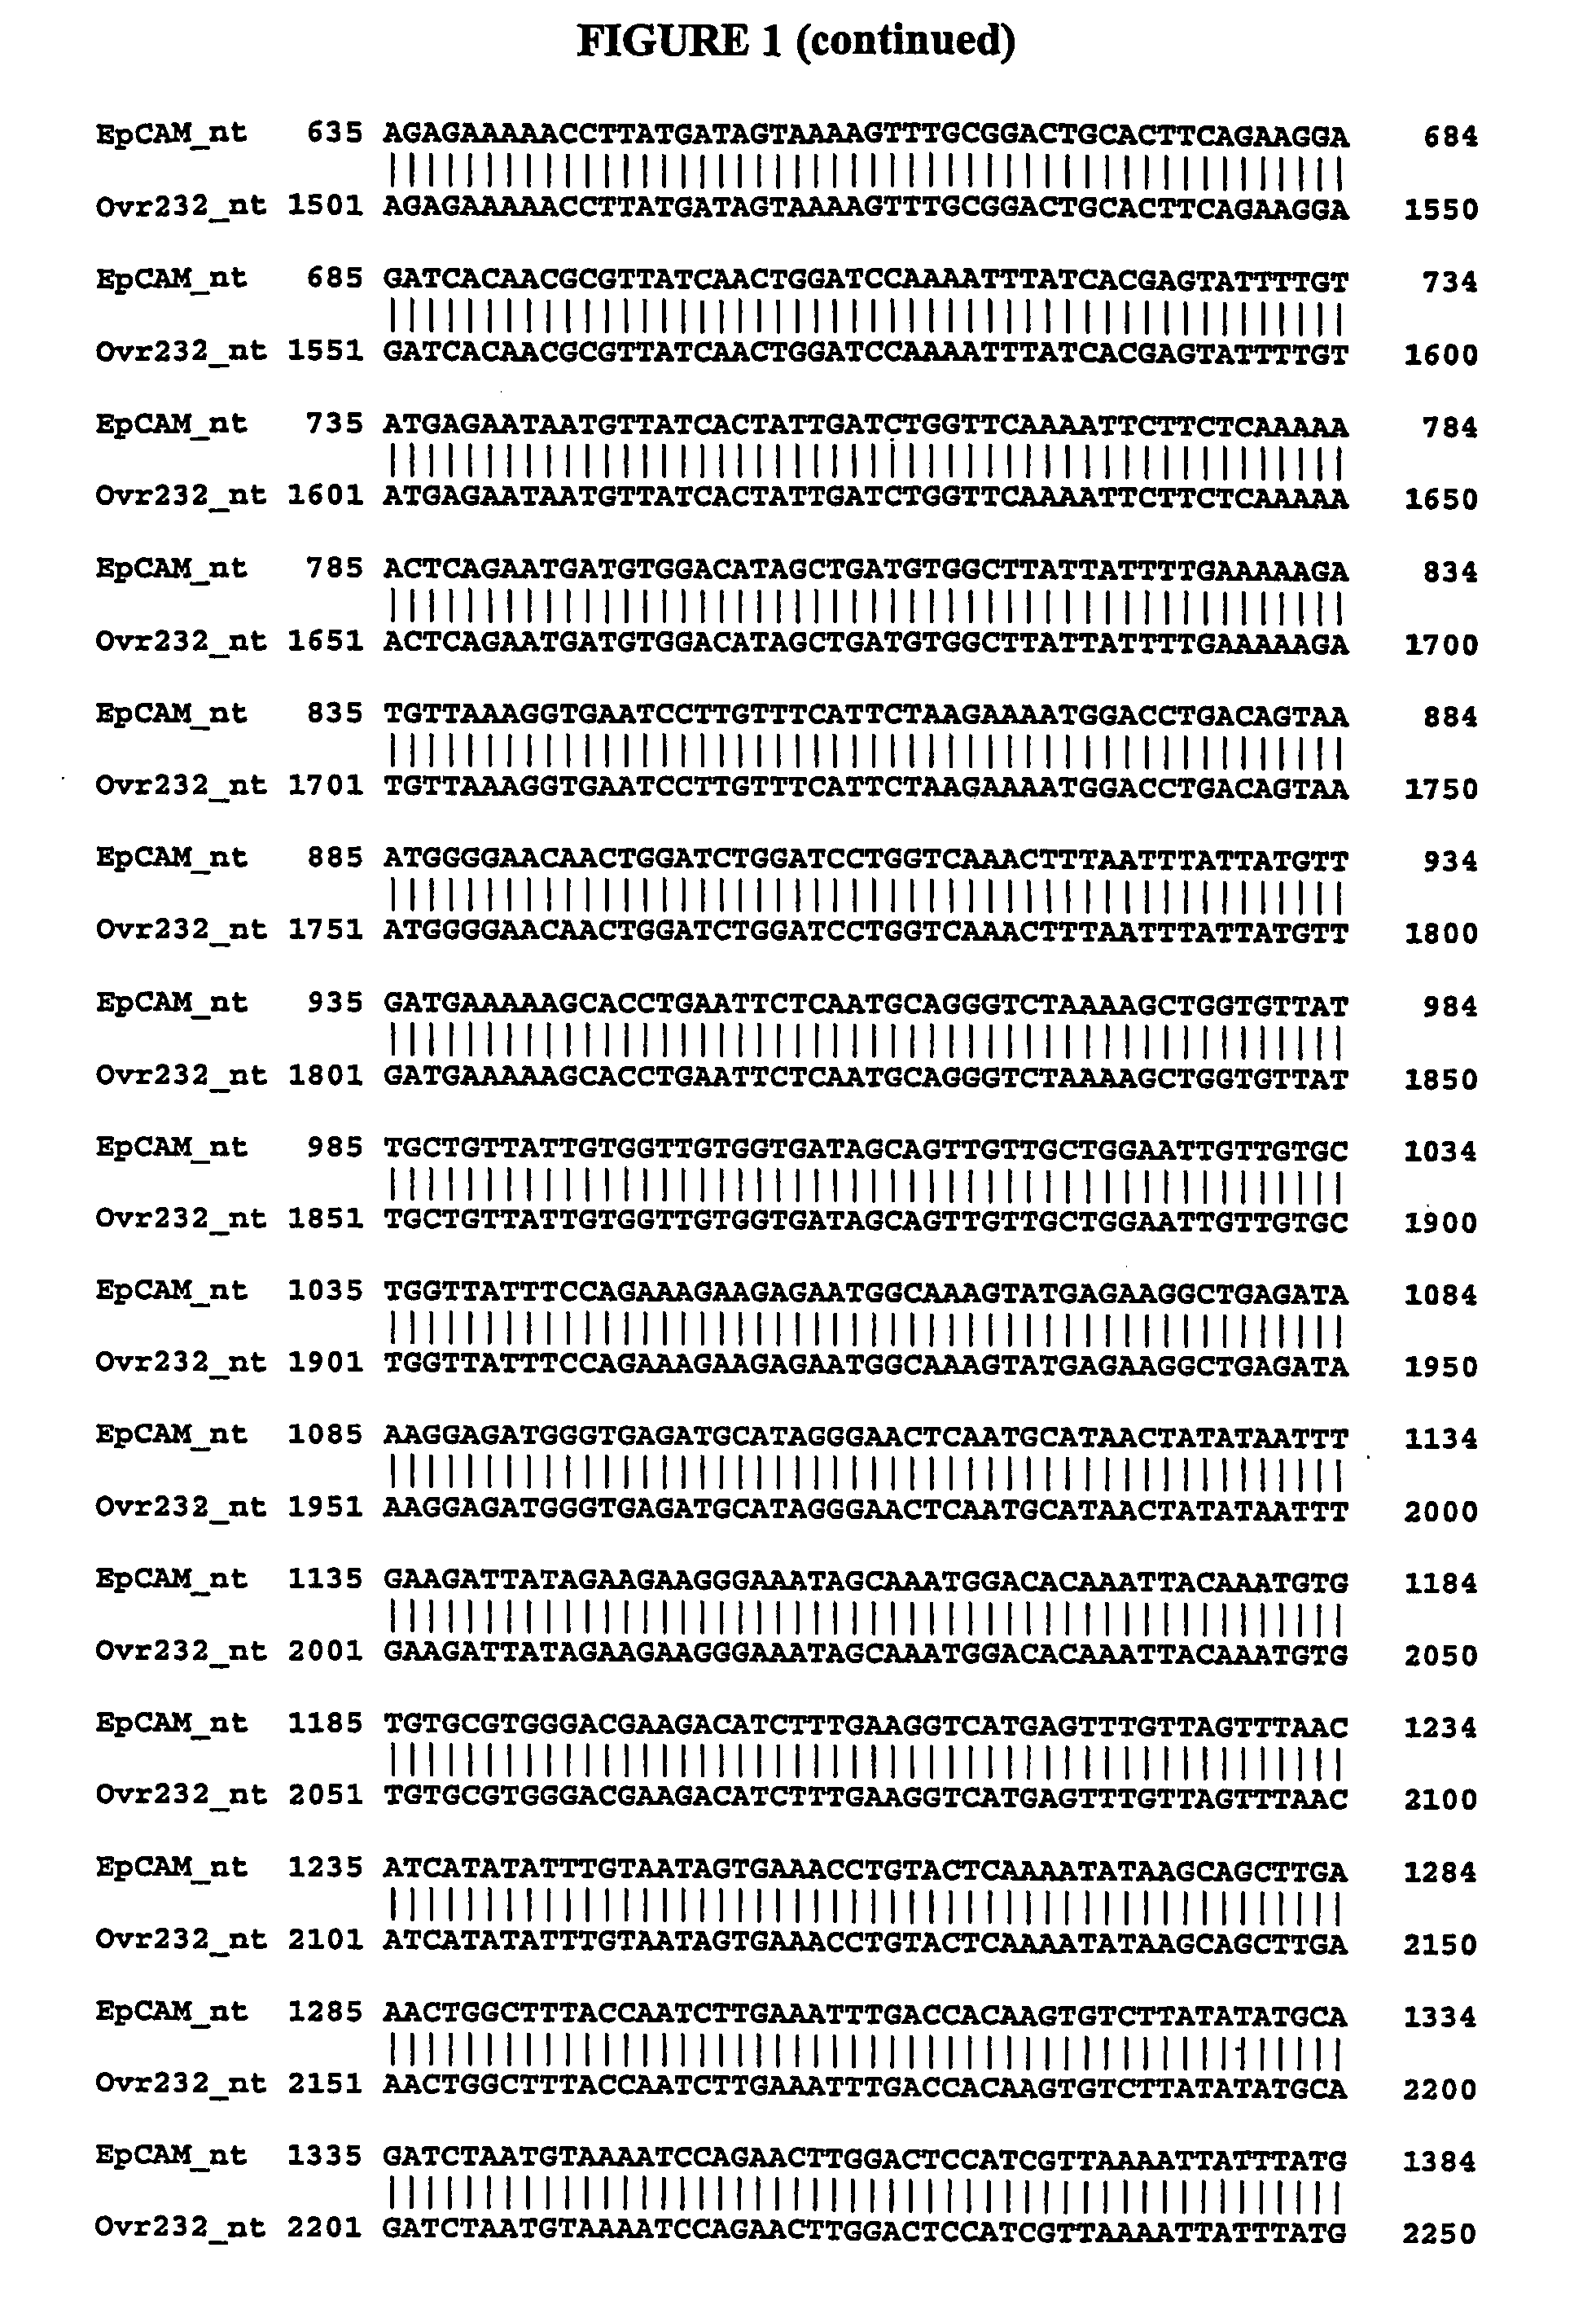 Composition, splice variants and methods relating to ovarian specific genes and proteins